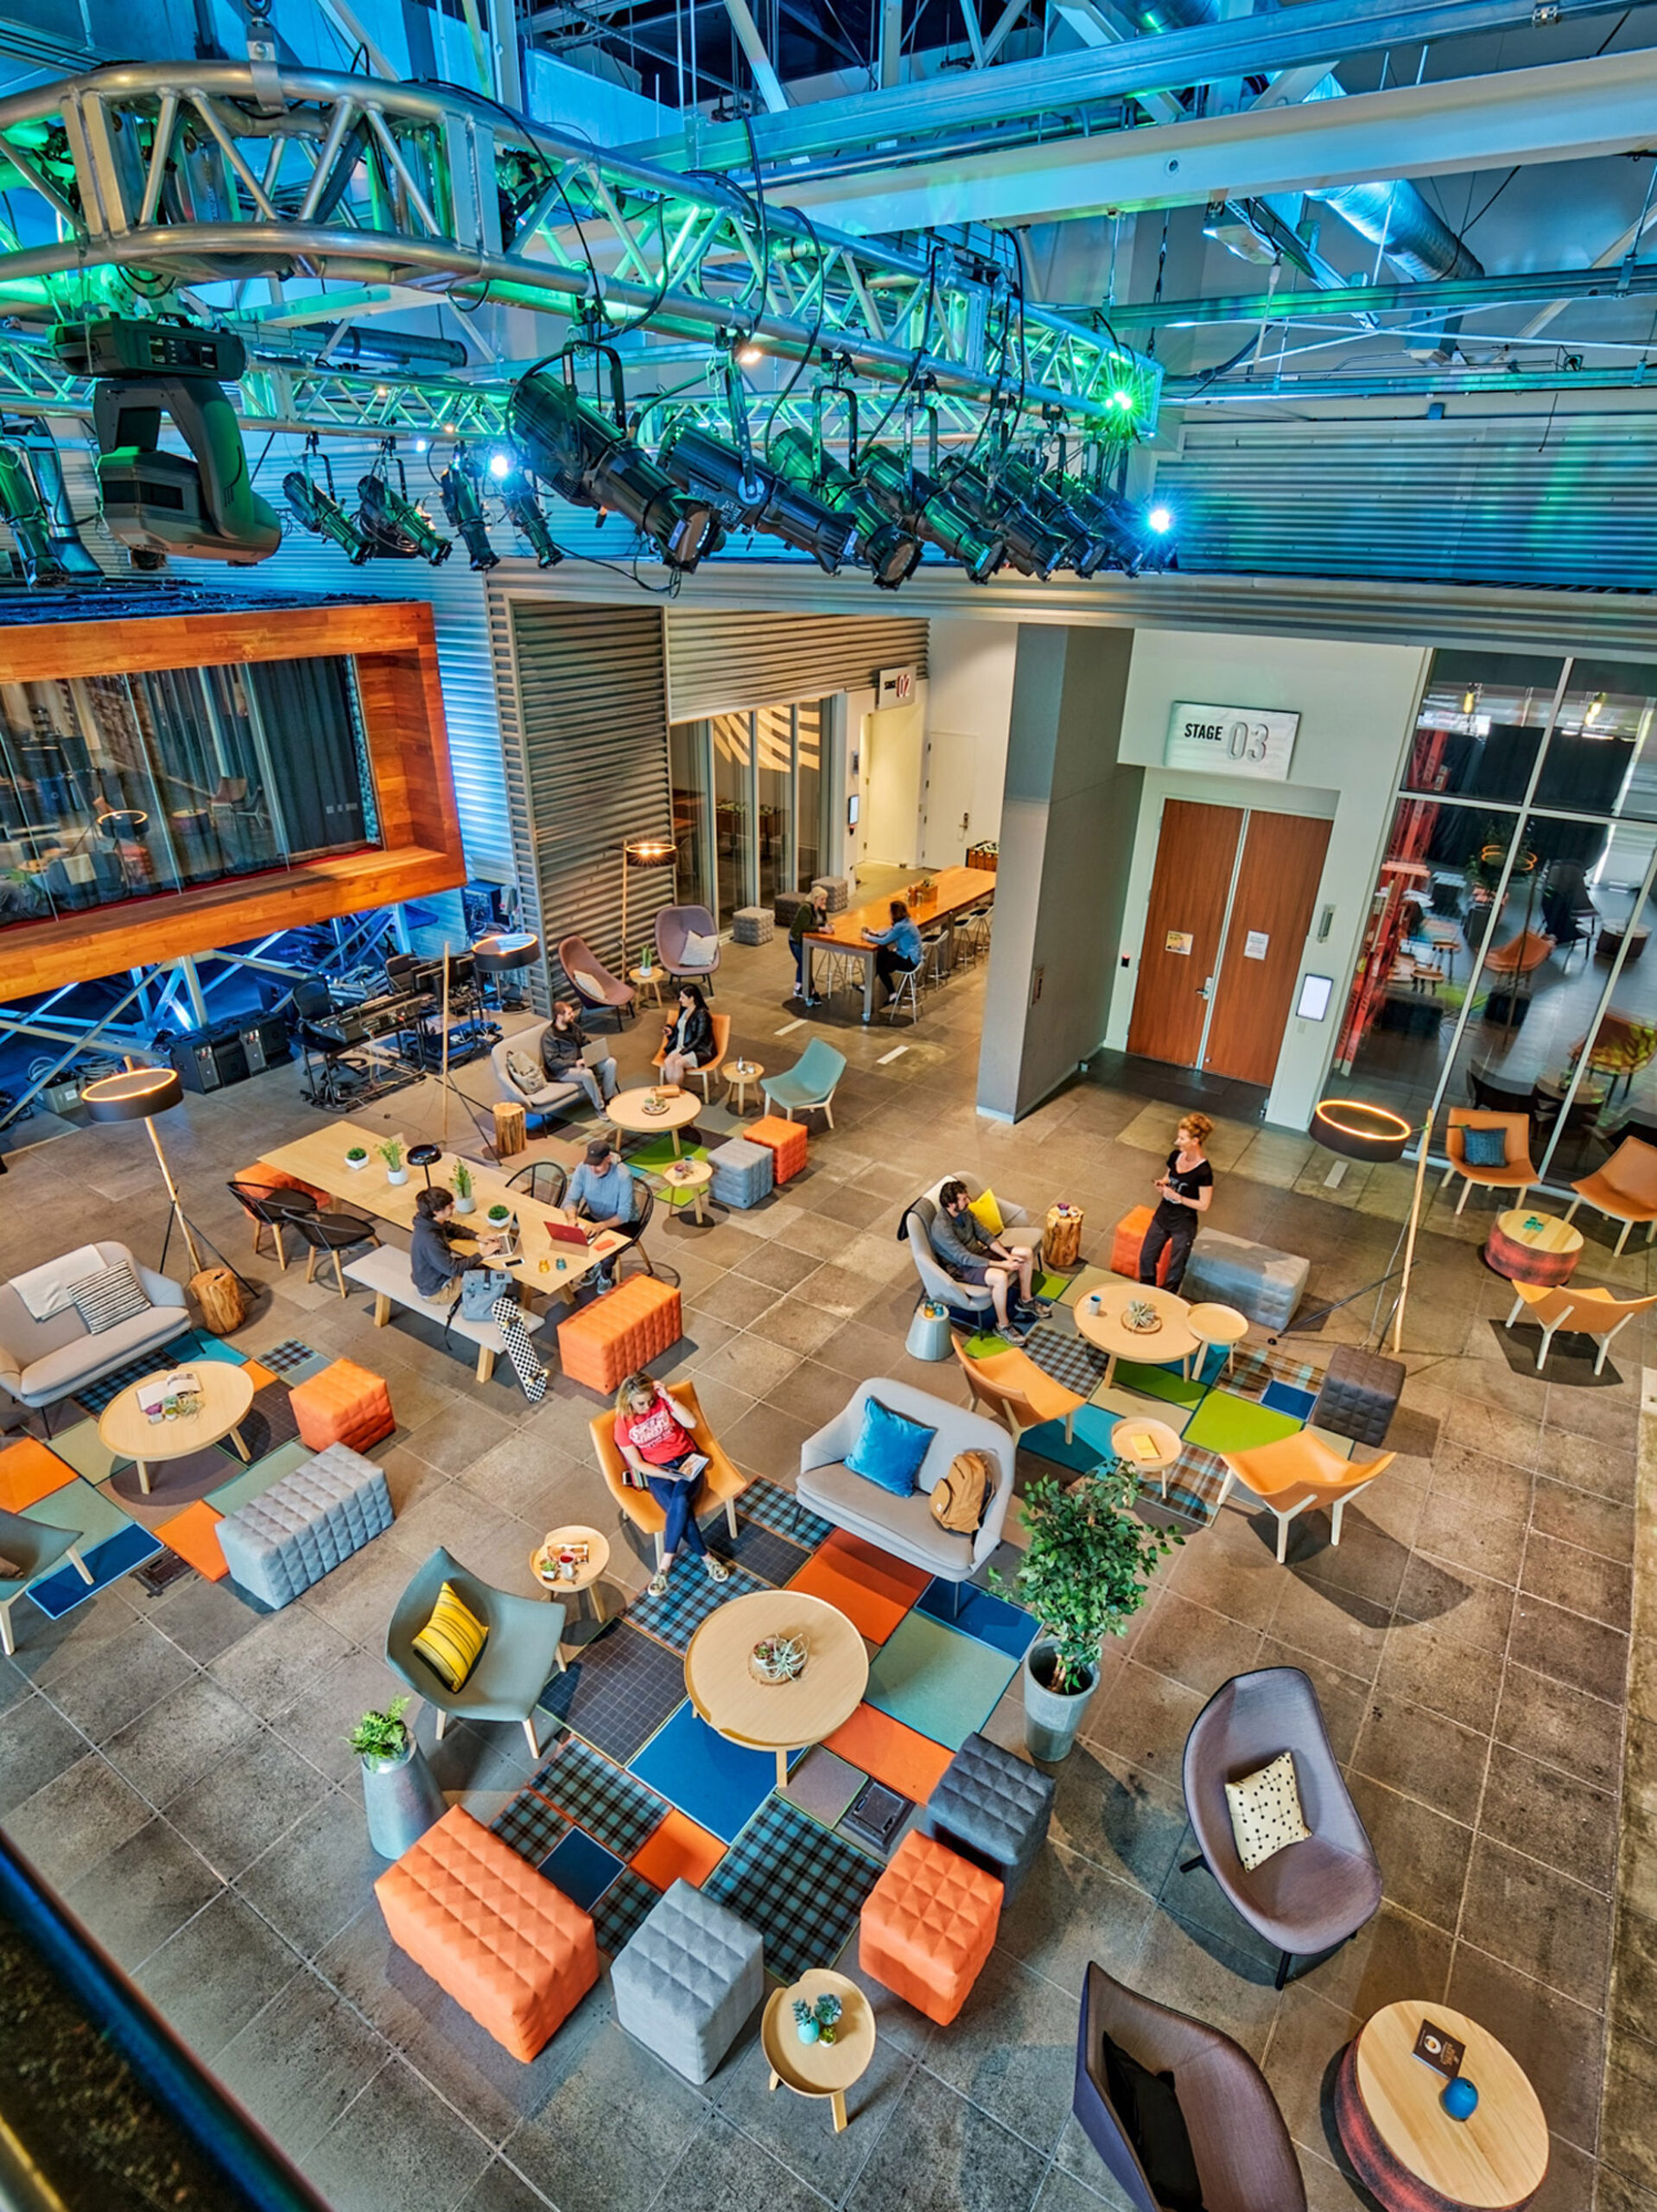 Elevated view of a vibrant, open-plan lounge space featuring modular seating in a mix of citrus and ocean hues. Exposed ceilings with theatrical lighting systems showcase the venue's adaptable nature. Varied table heights and seating styles create a dynamic multi-use area promoting interaction and flexibility.